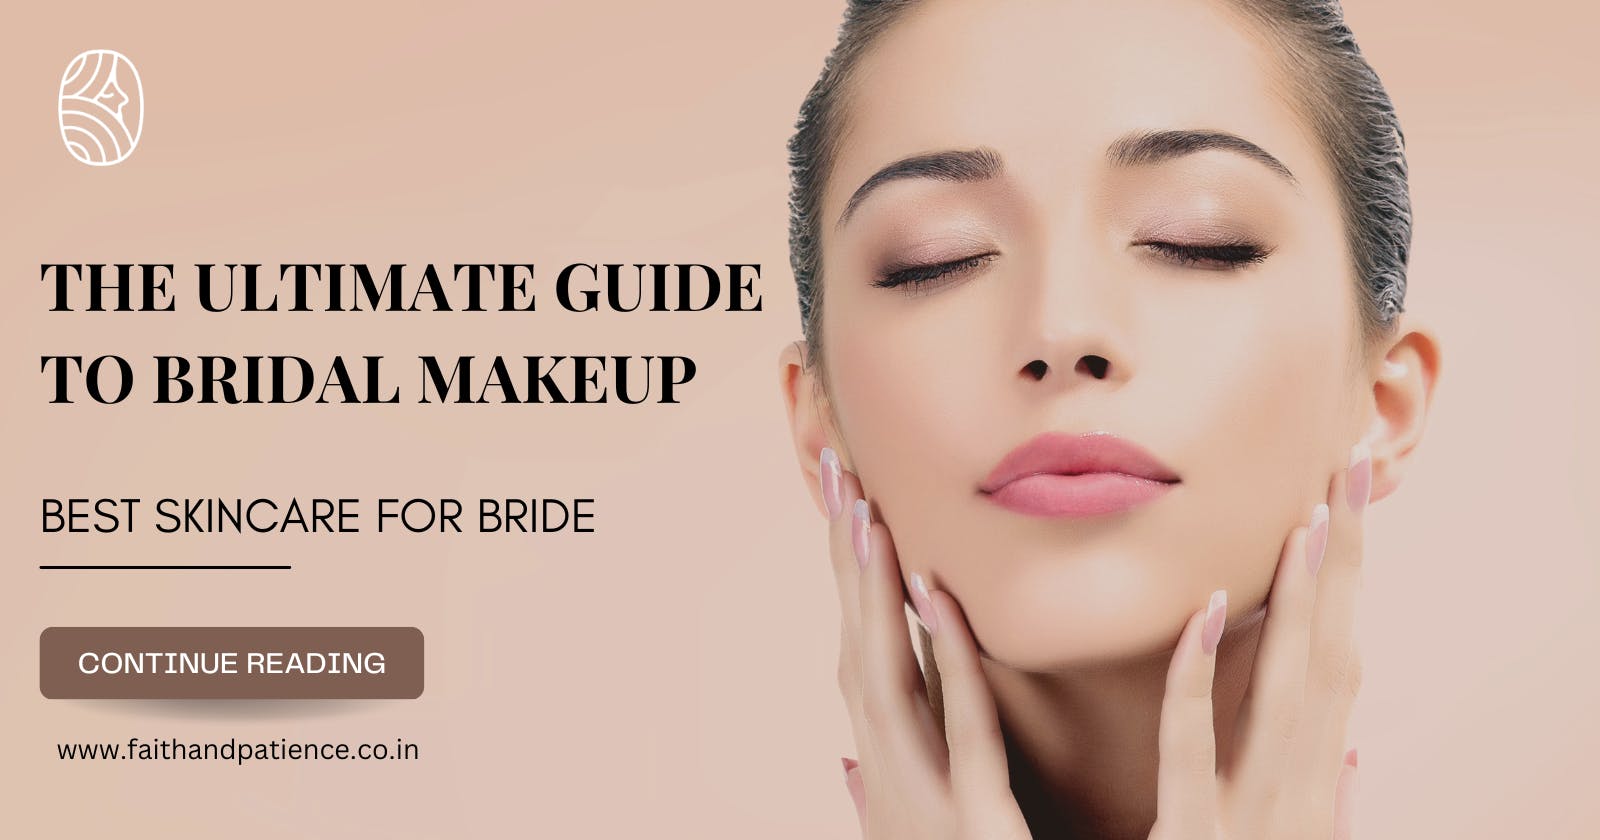 The Ultimate Guide to Bridal Makeup